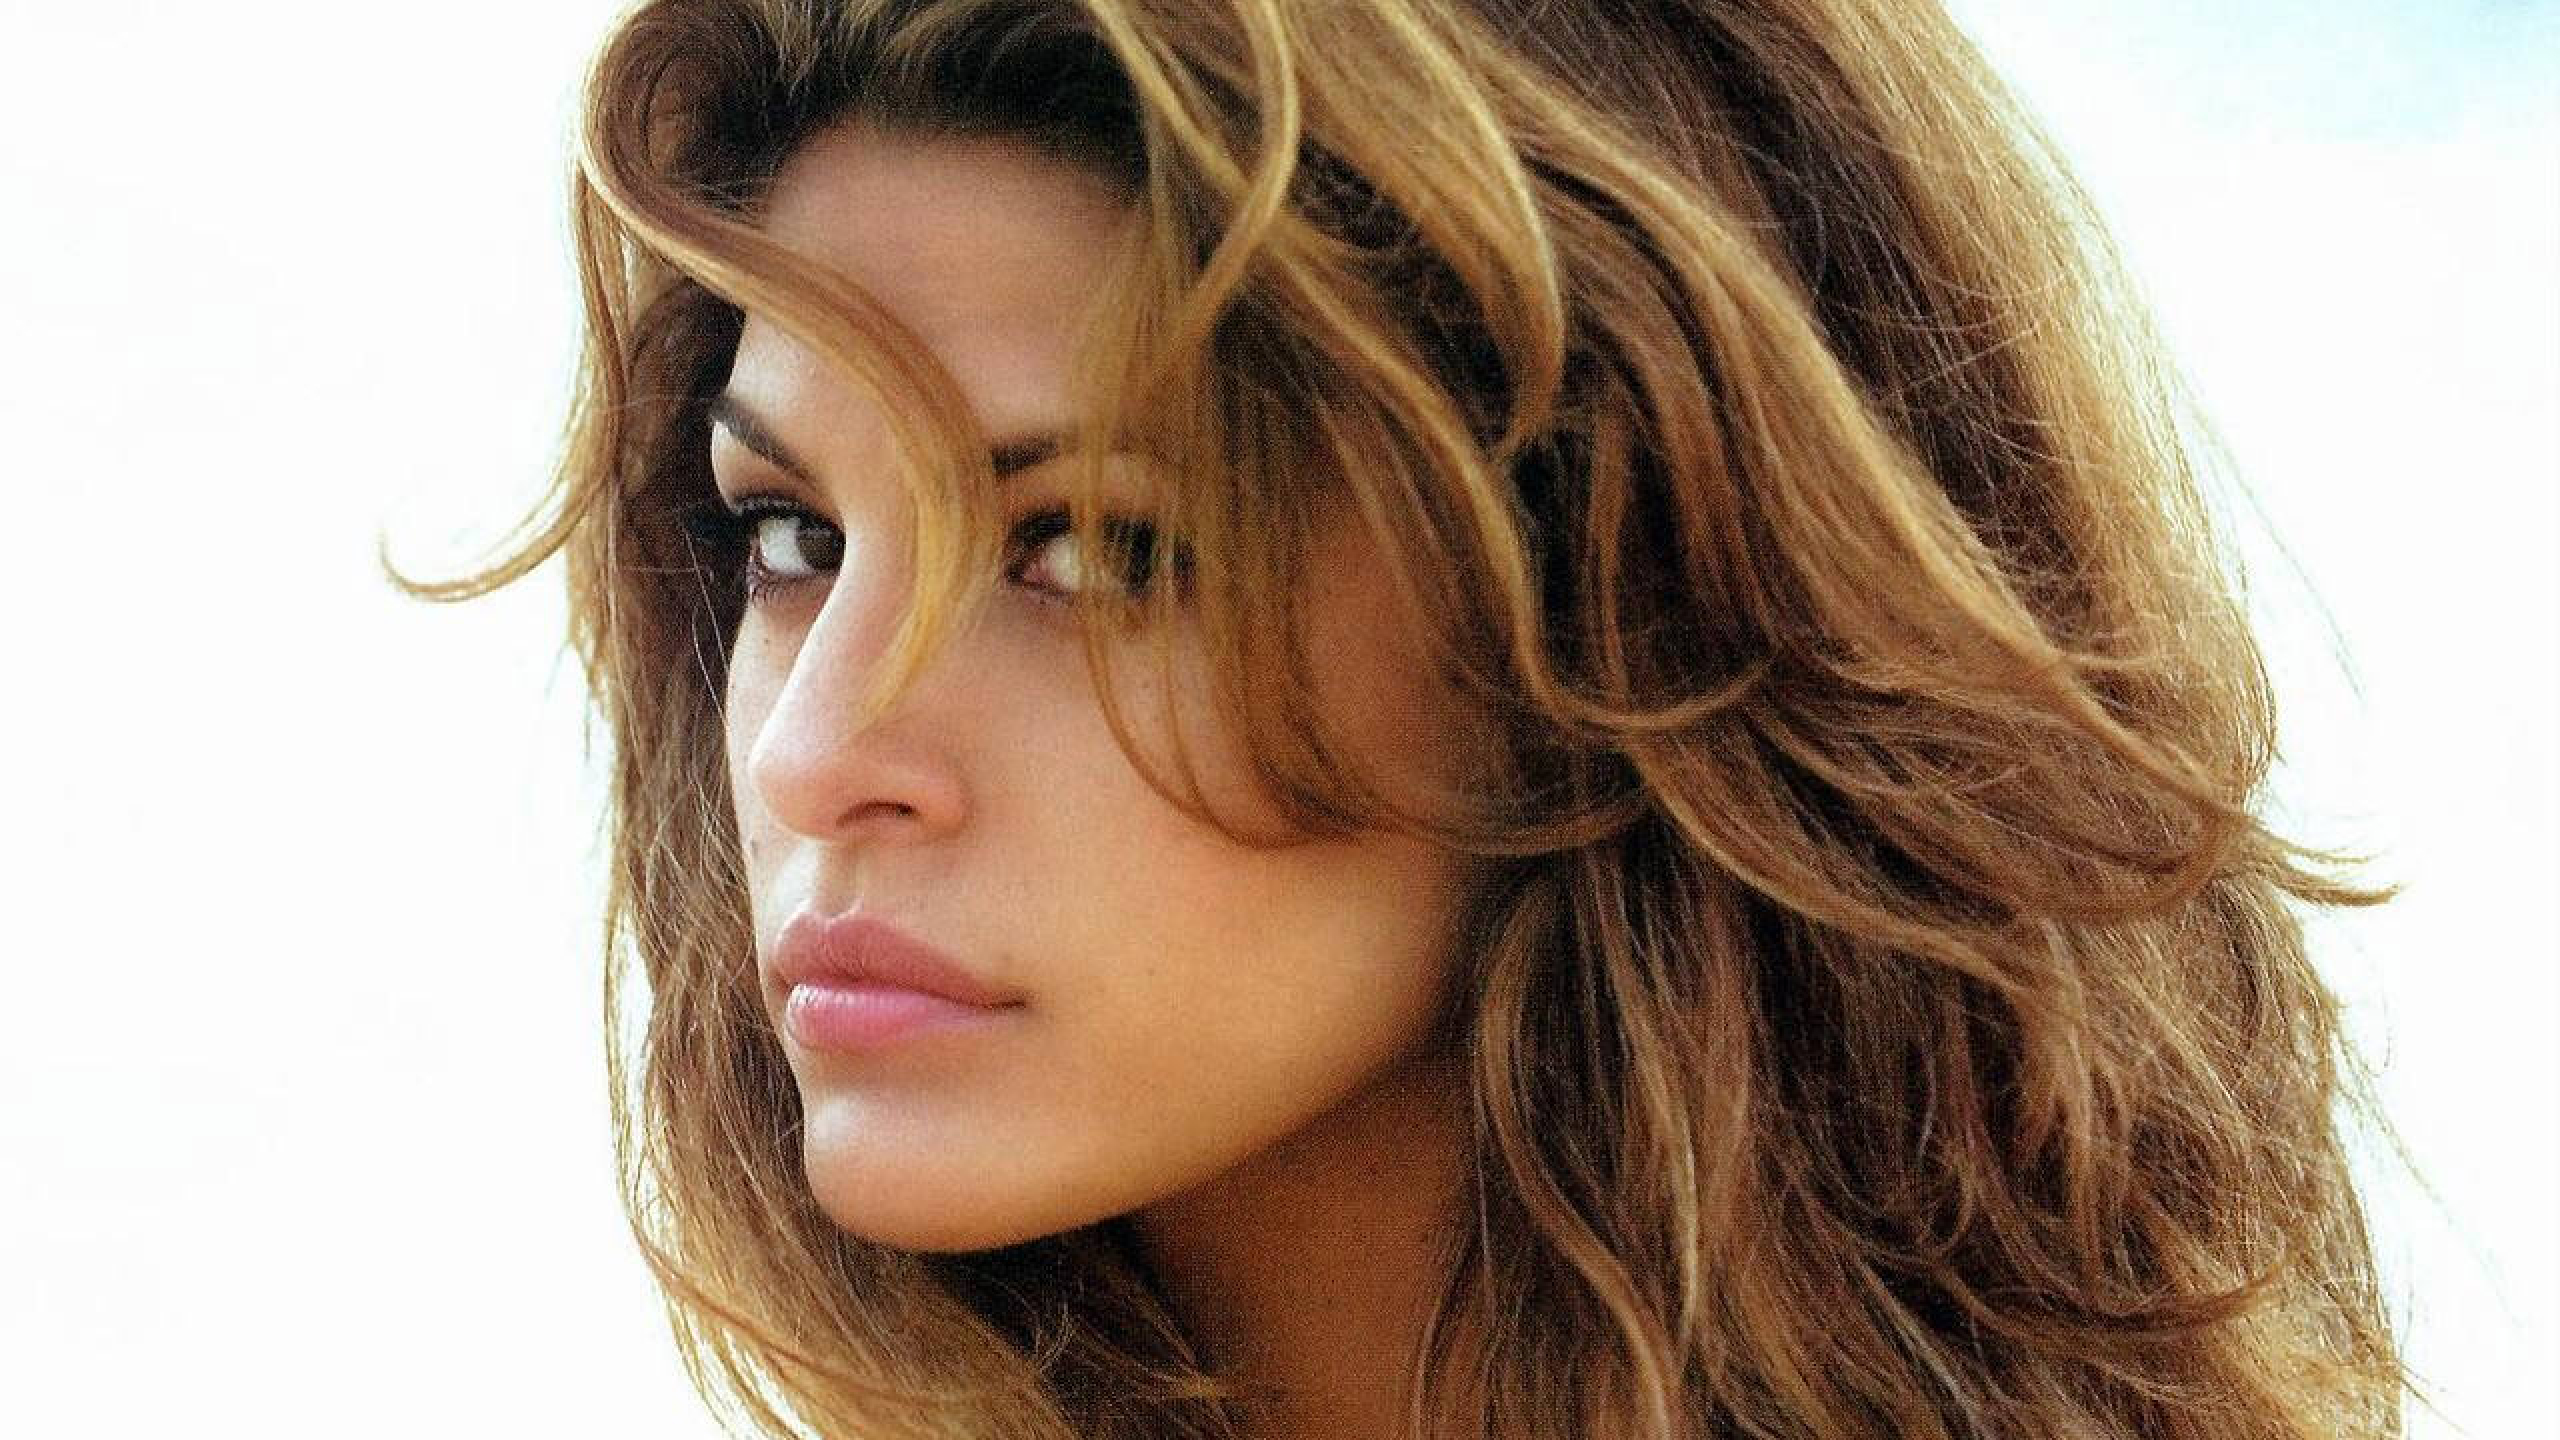 2560x1440 Resolution Eva Mendes Sexy Images 1440p Resolution Wallpaper Wallpapers Den